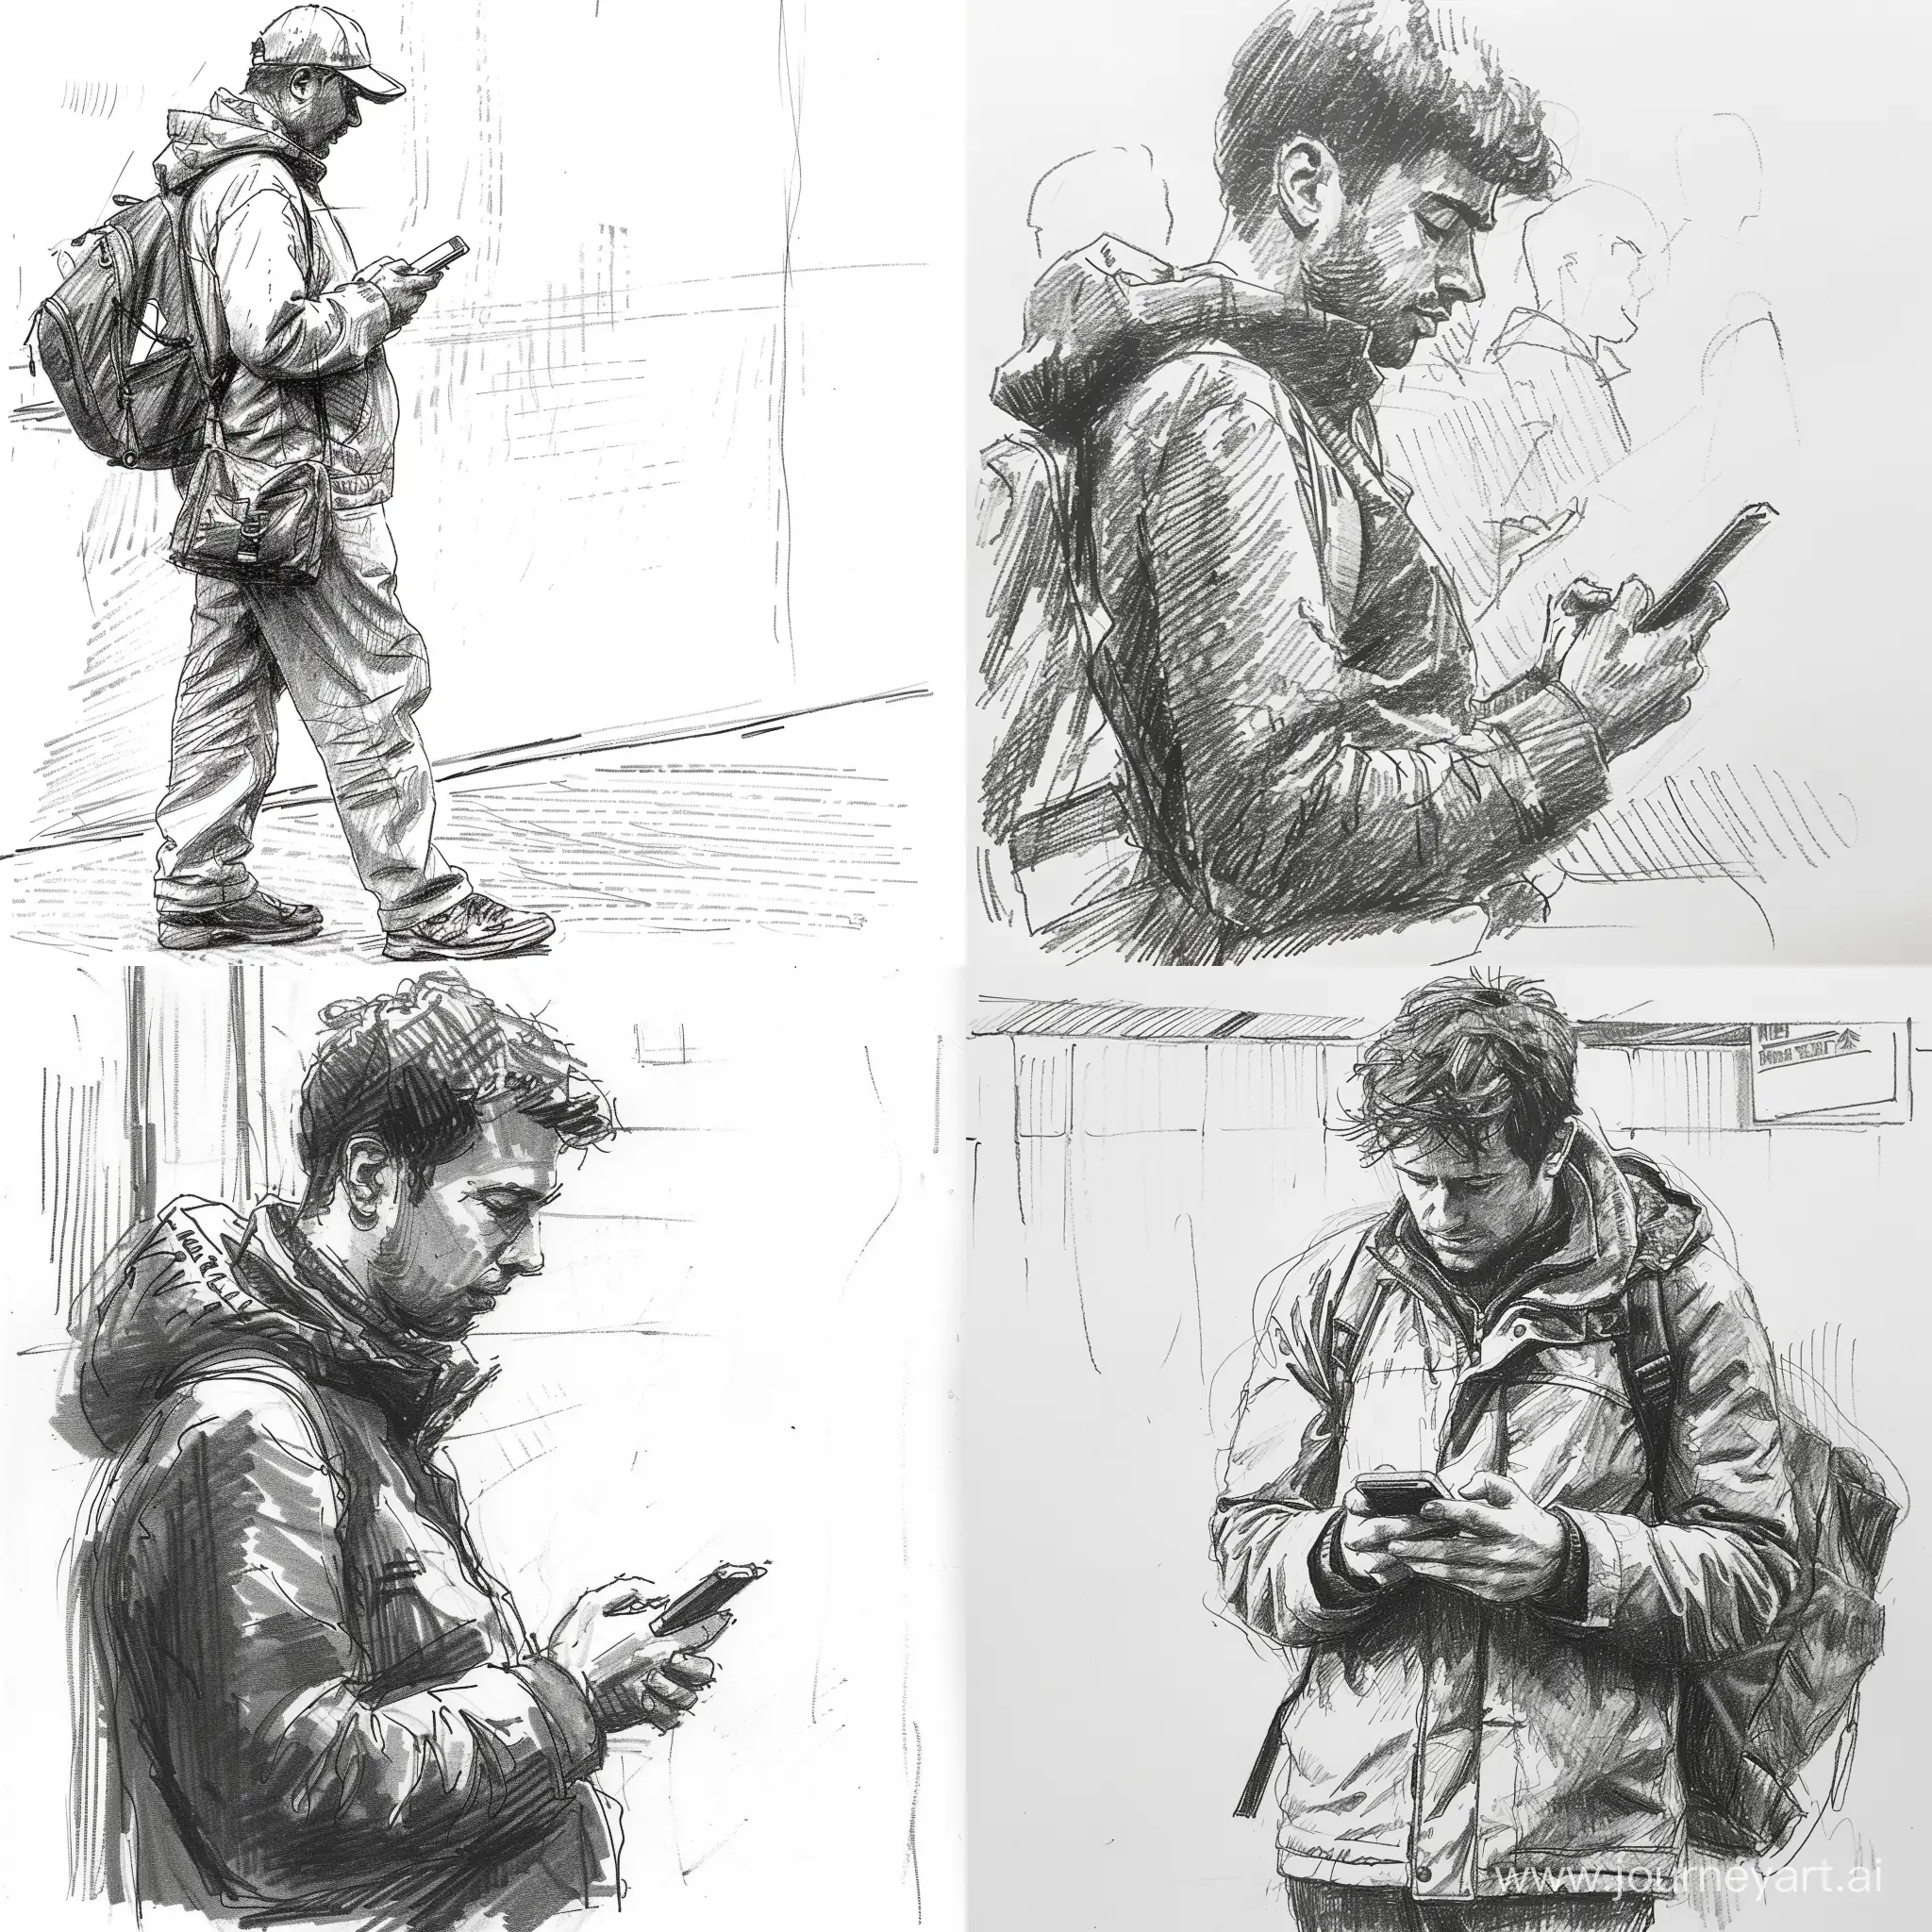 Man-in-Bus-Station-Engaged-with-Mobile-Device-Monochrome-Sketch-Art